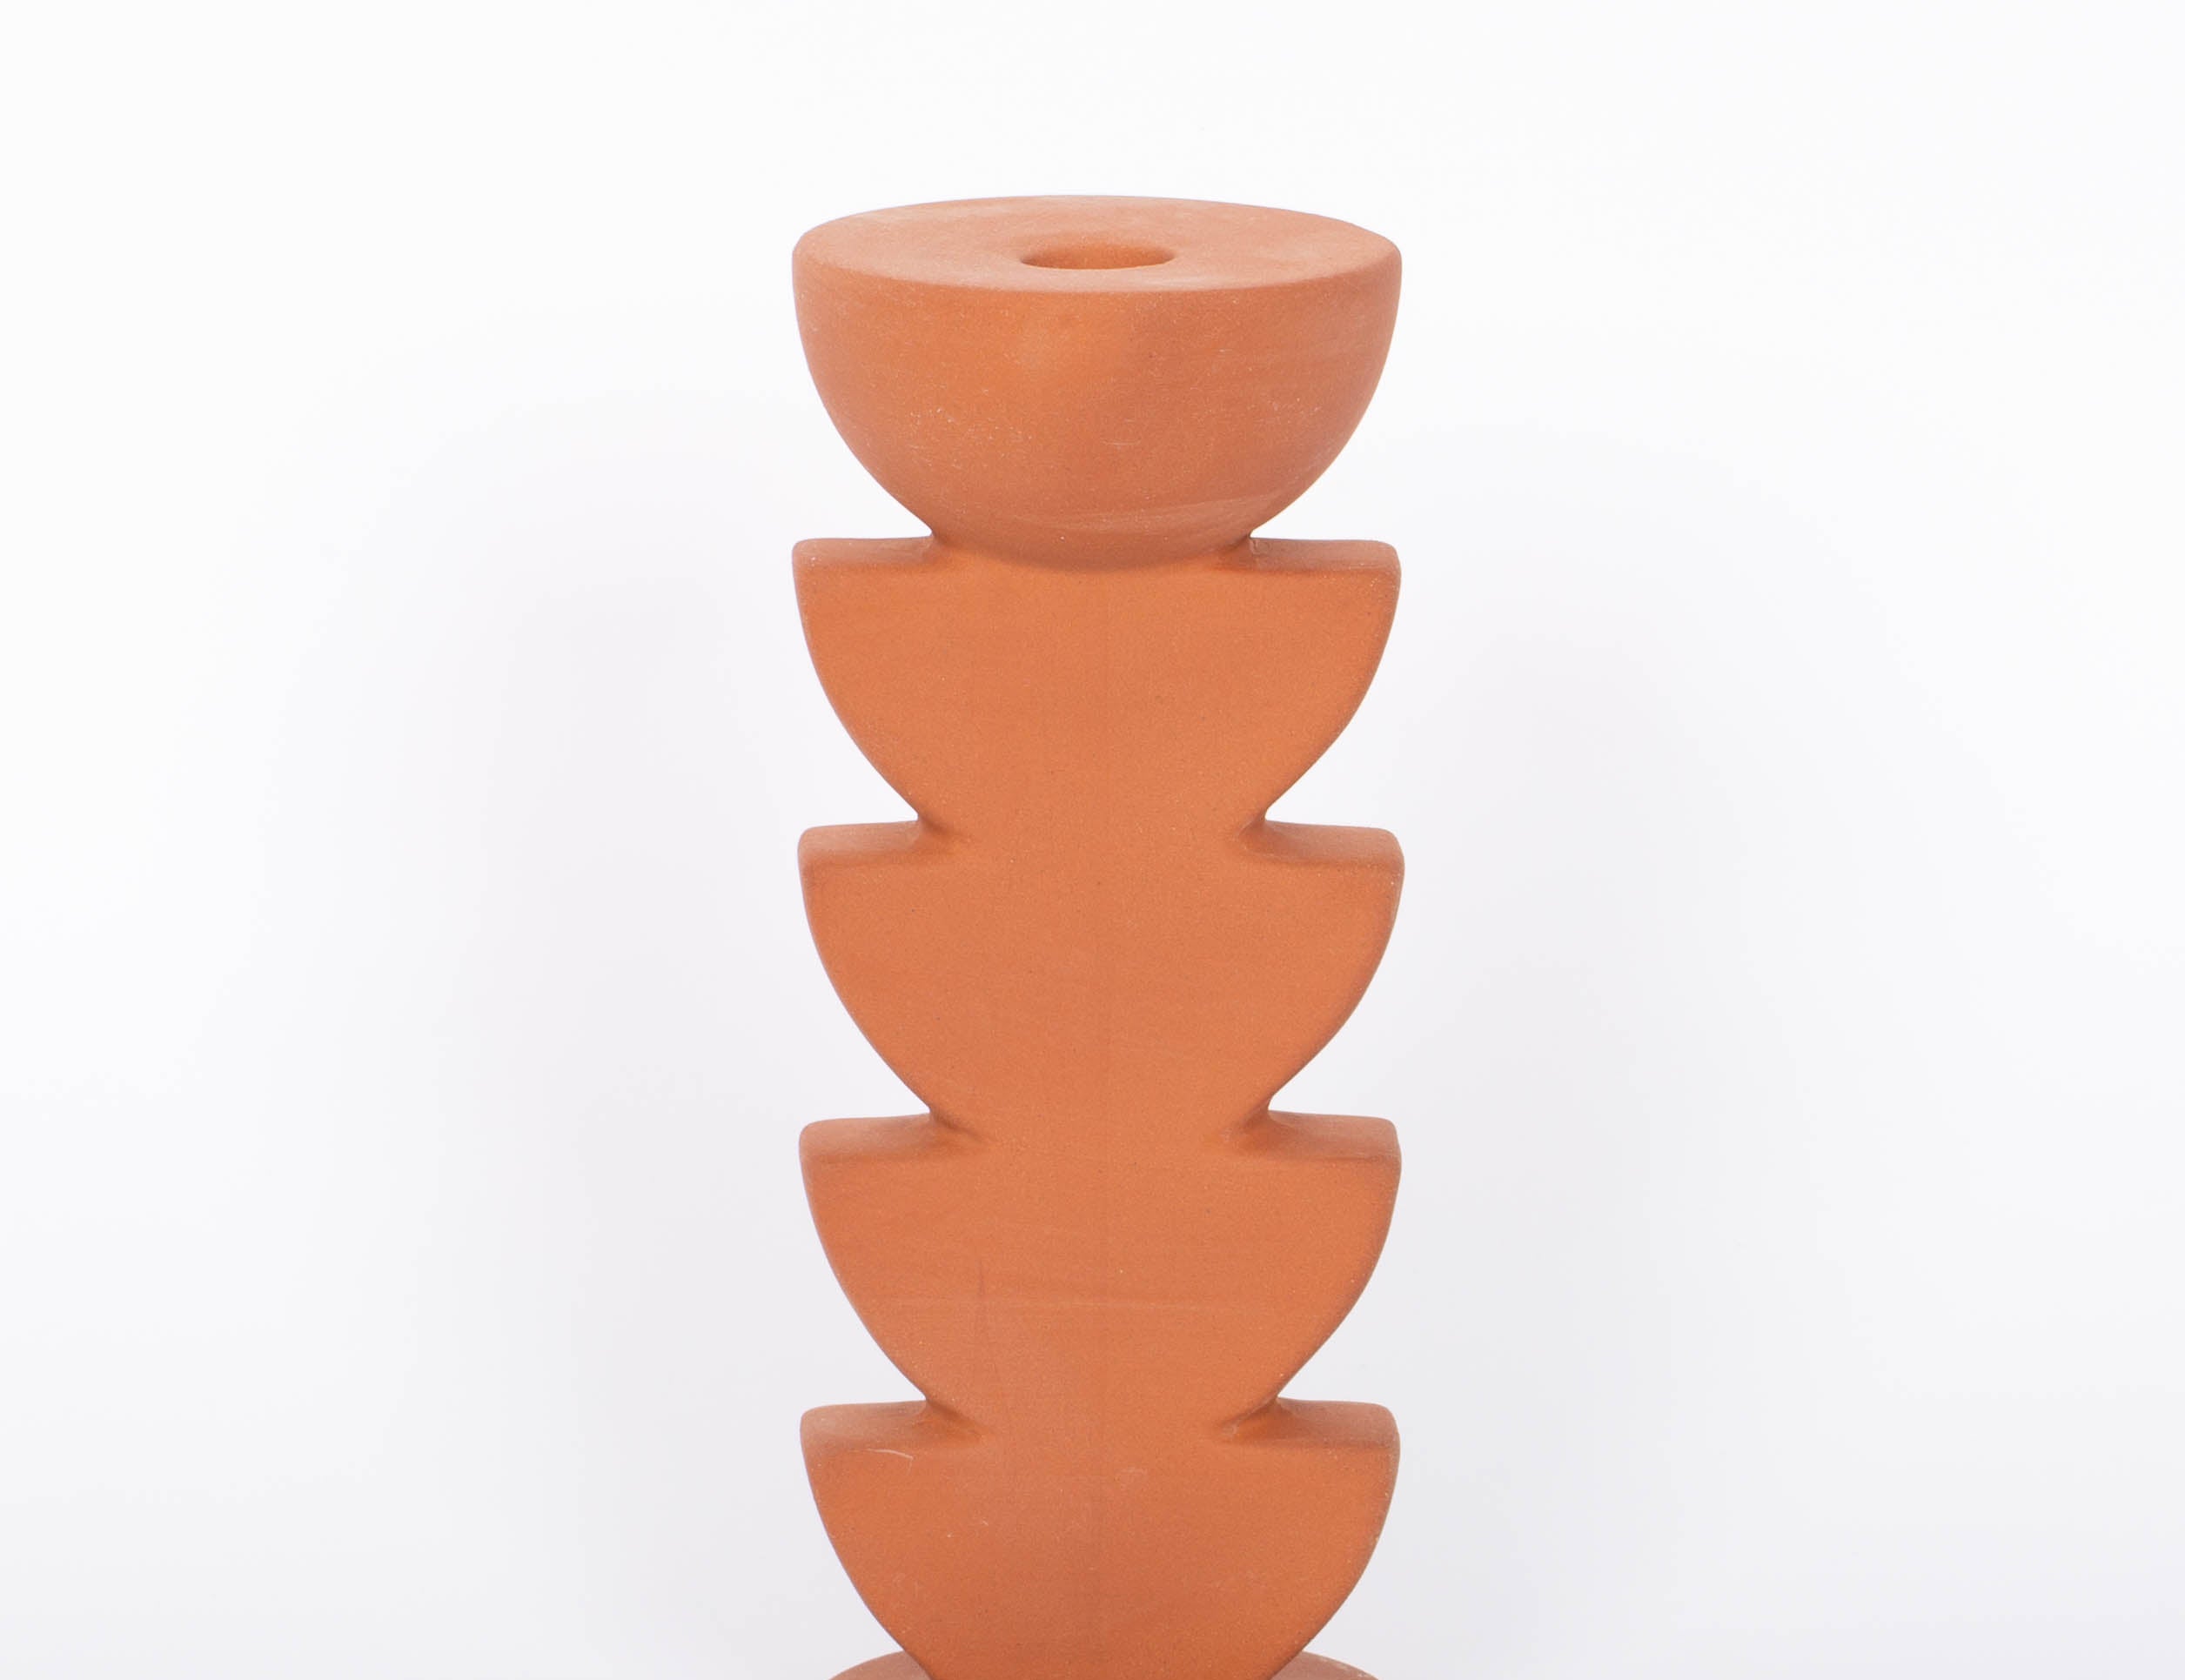 Cadwell Candle Holder stacked half moon design in natural terracotta for taper candles. White background.